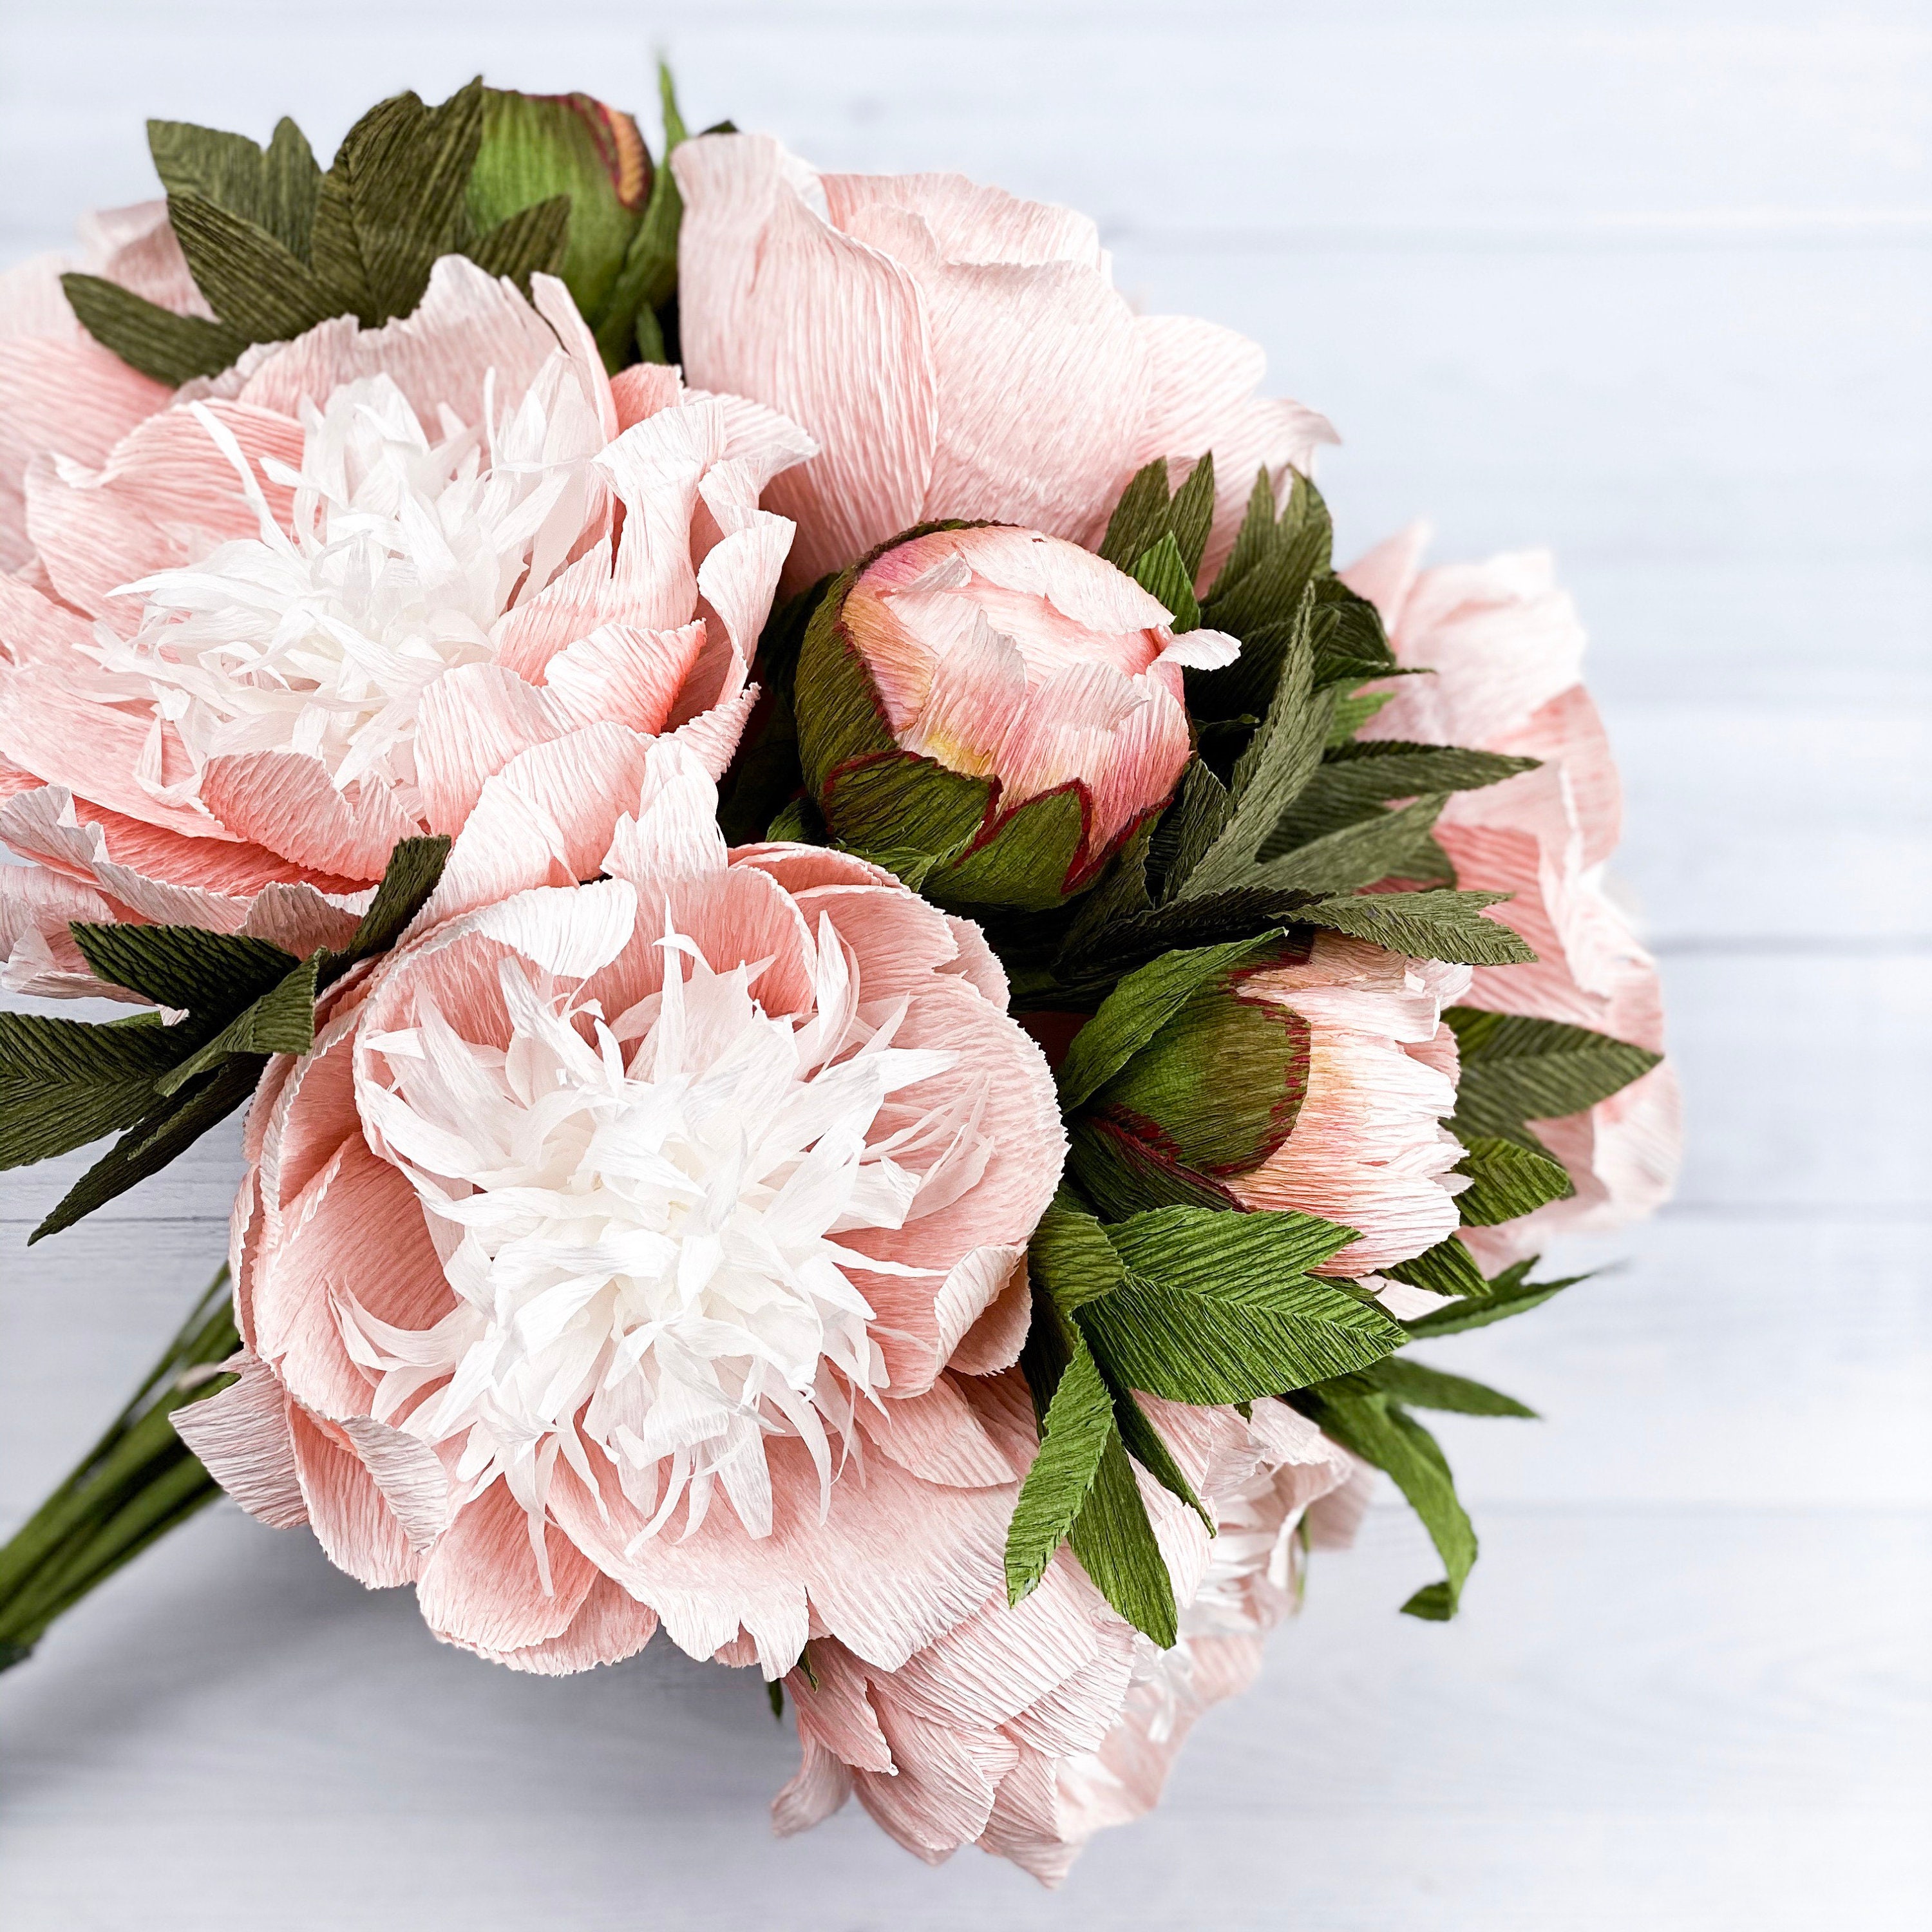 Coral and White Paper Flowers Bouquet Arrangement of Peony and Garden Rose,  Wedding Bridal Bouquet, 1st Anniversary Gift, 